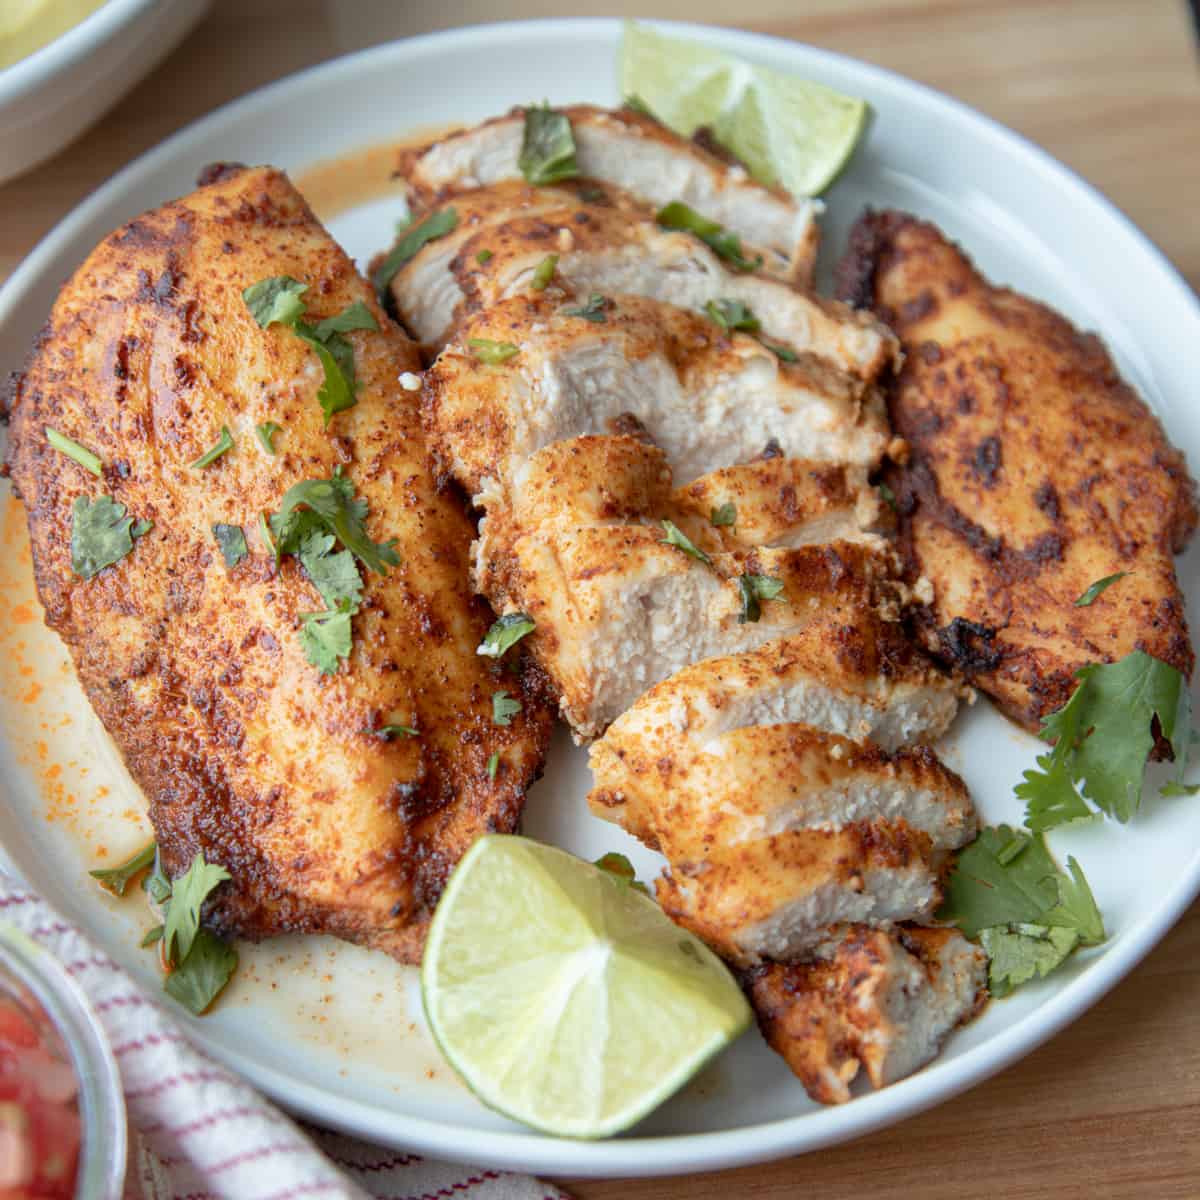 Three blackened chicken breasts on a plate garnished with limes and chopped cilantro. The middle chicken breast is sliced. 